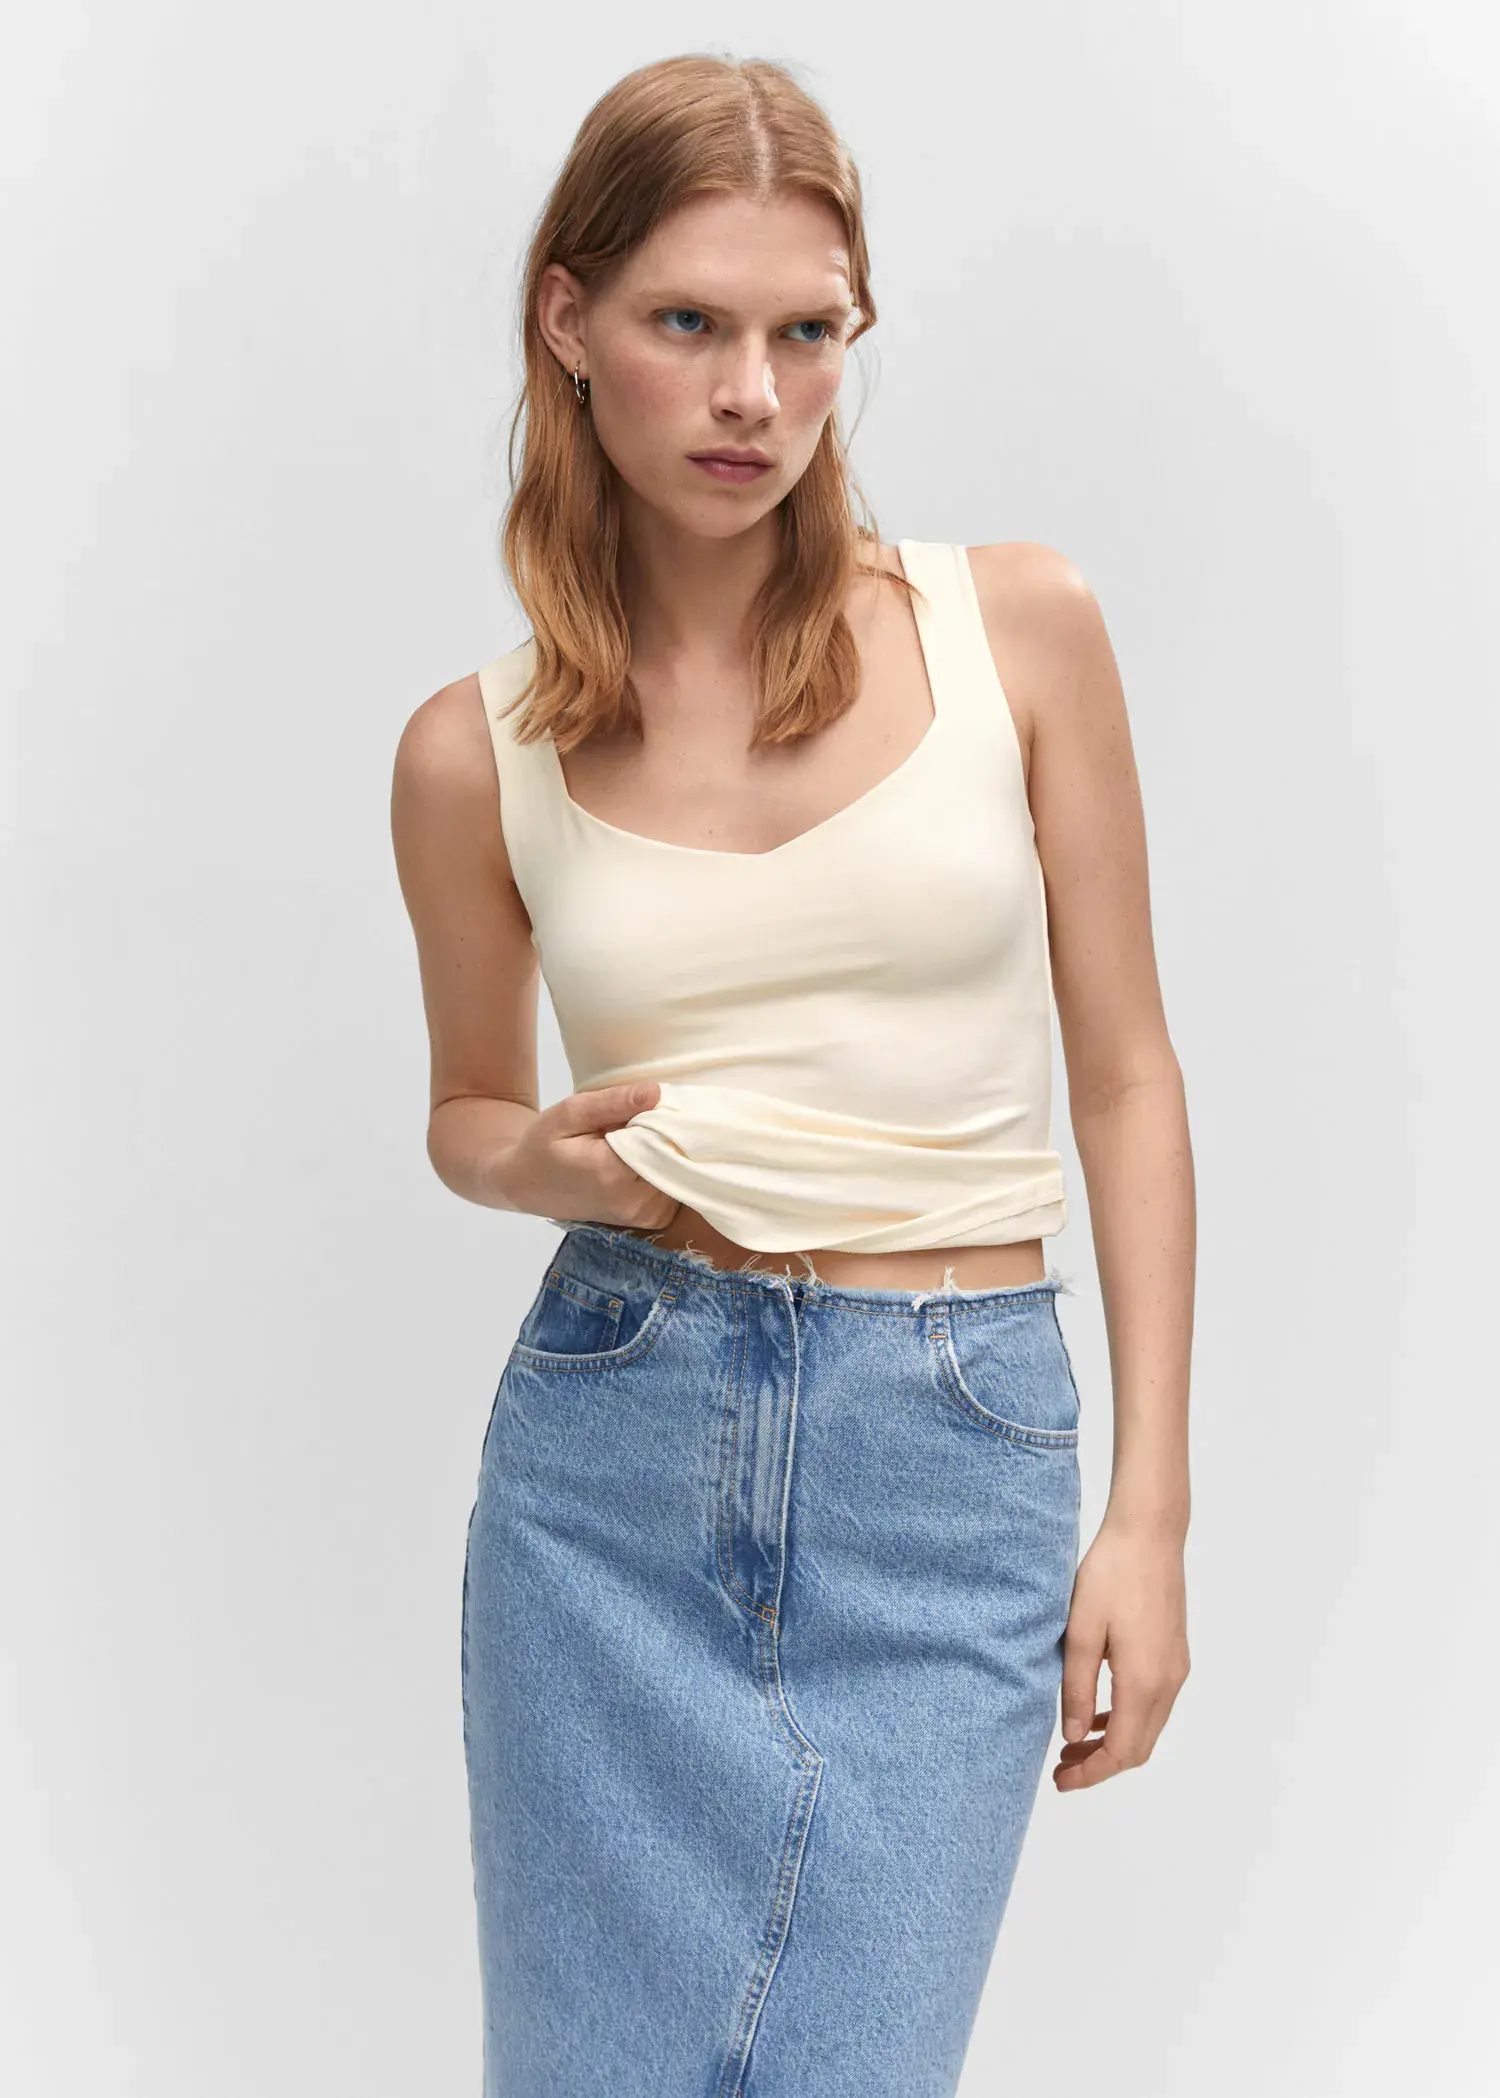 Mango Open elastic top. a woman in a white tank top and blue denim skirt. 